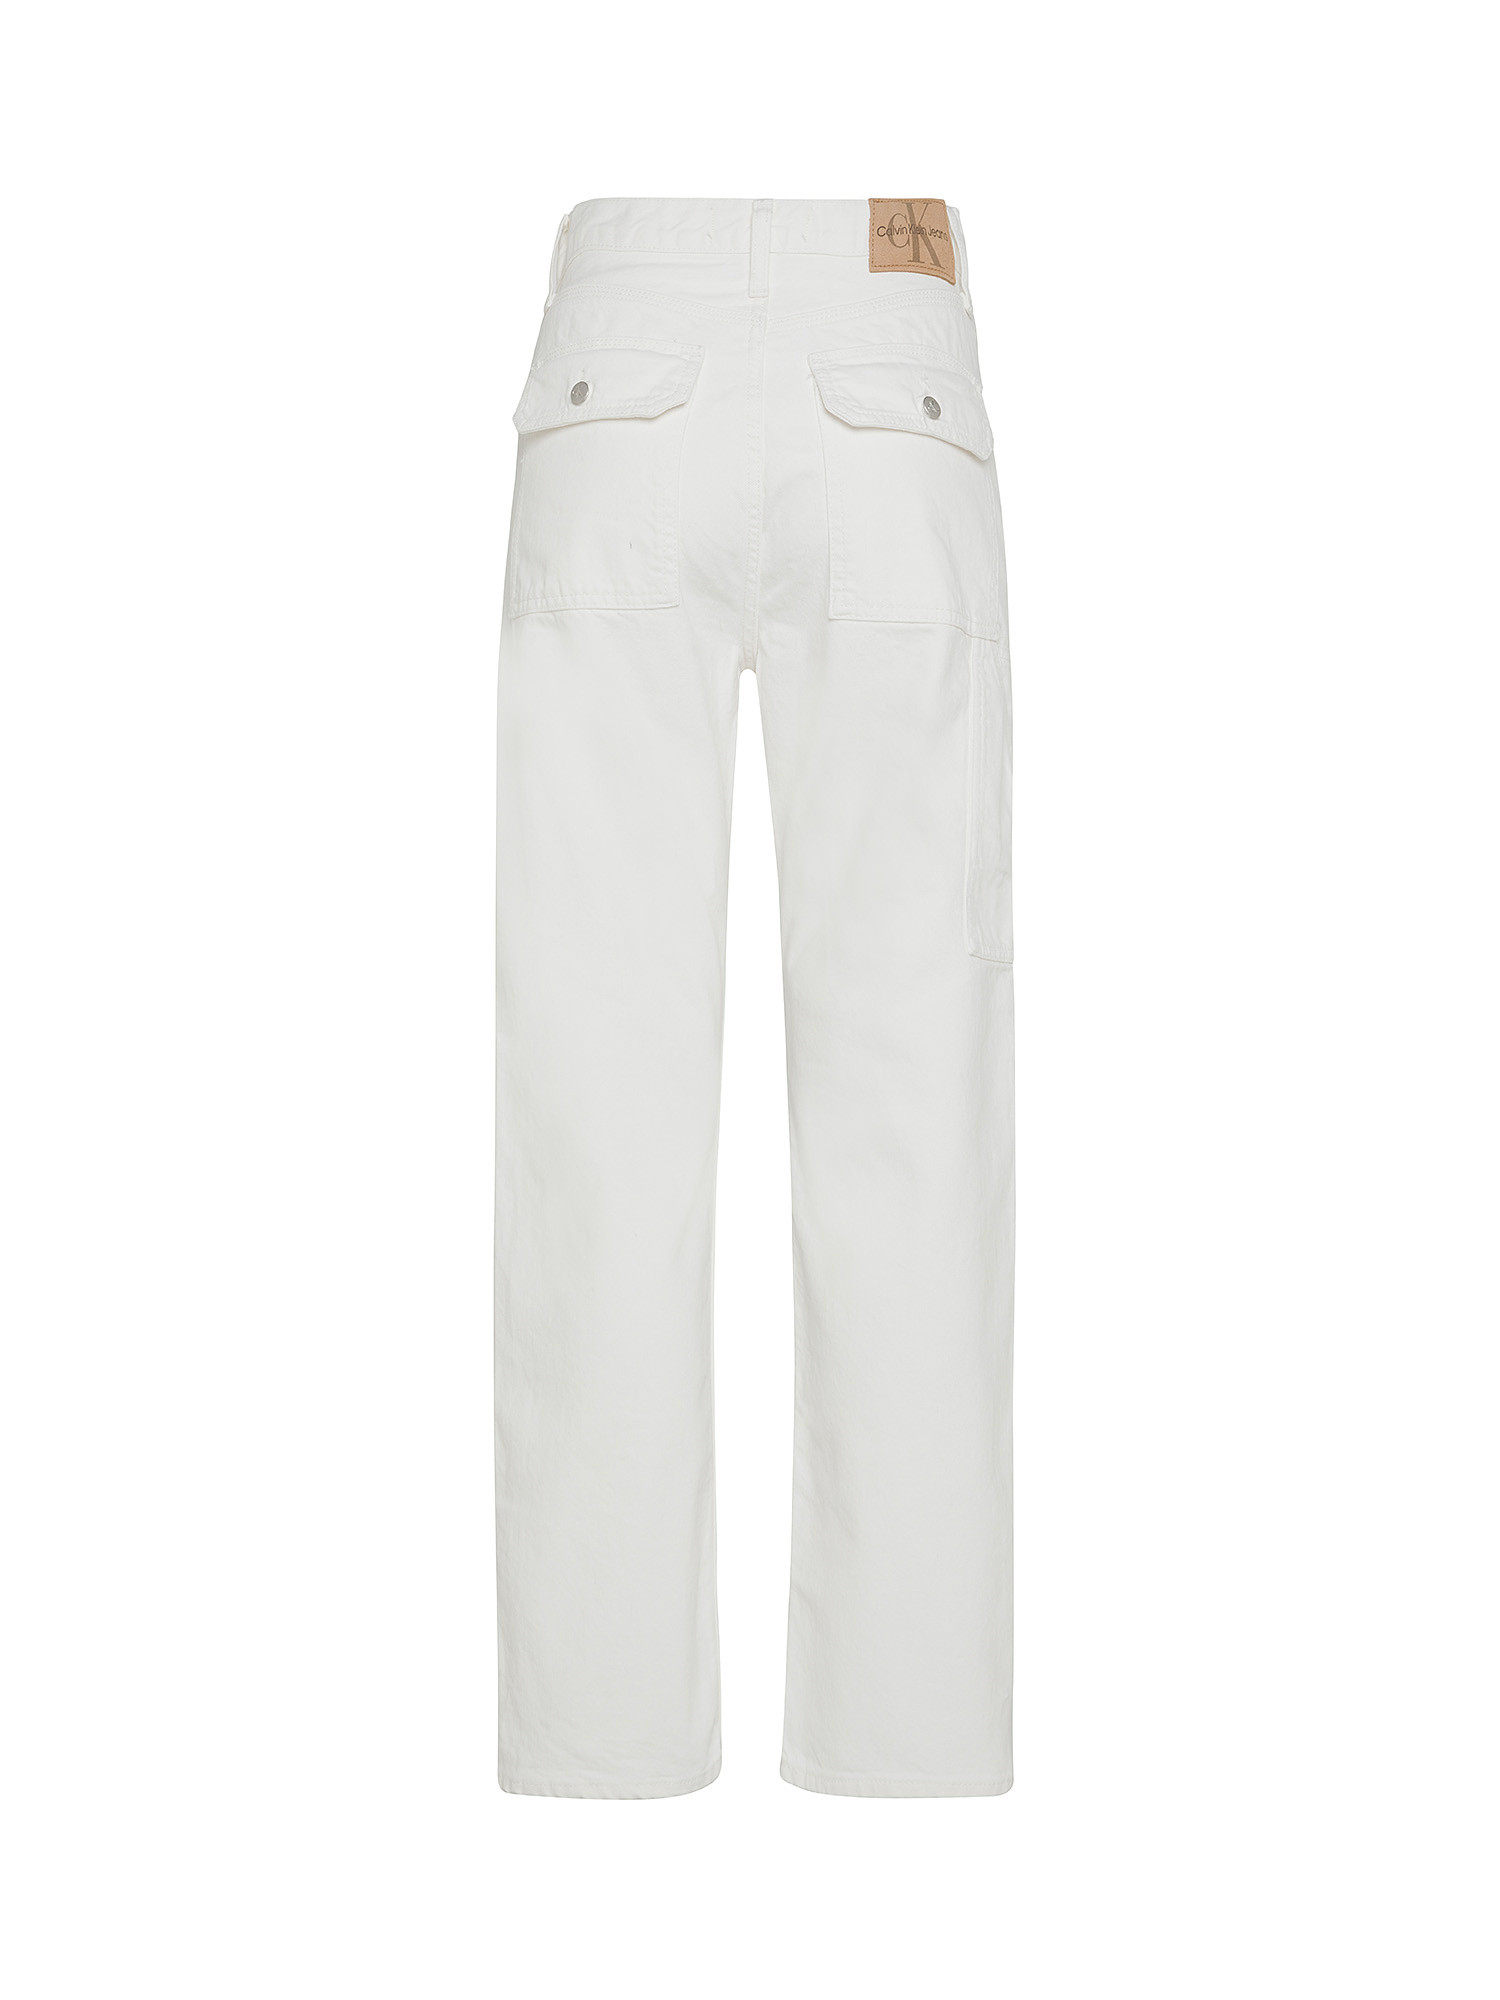 Calvin Klein Jeans - Straight cotton jeans, White, large image number 1